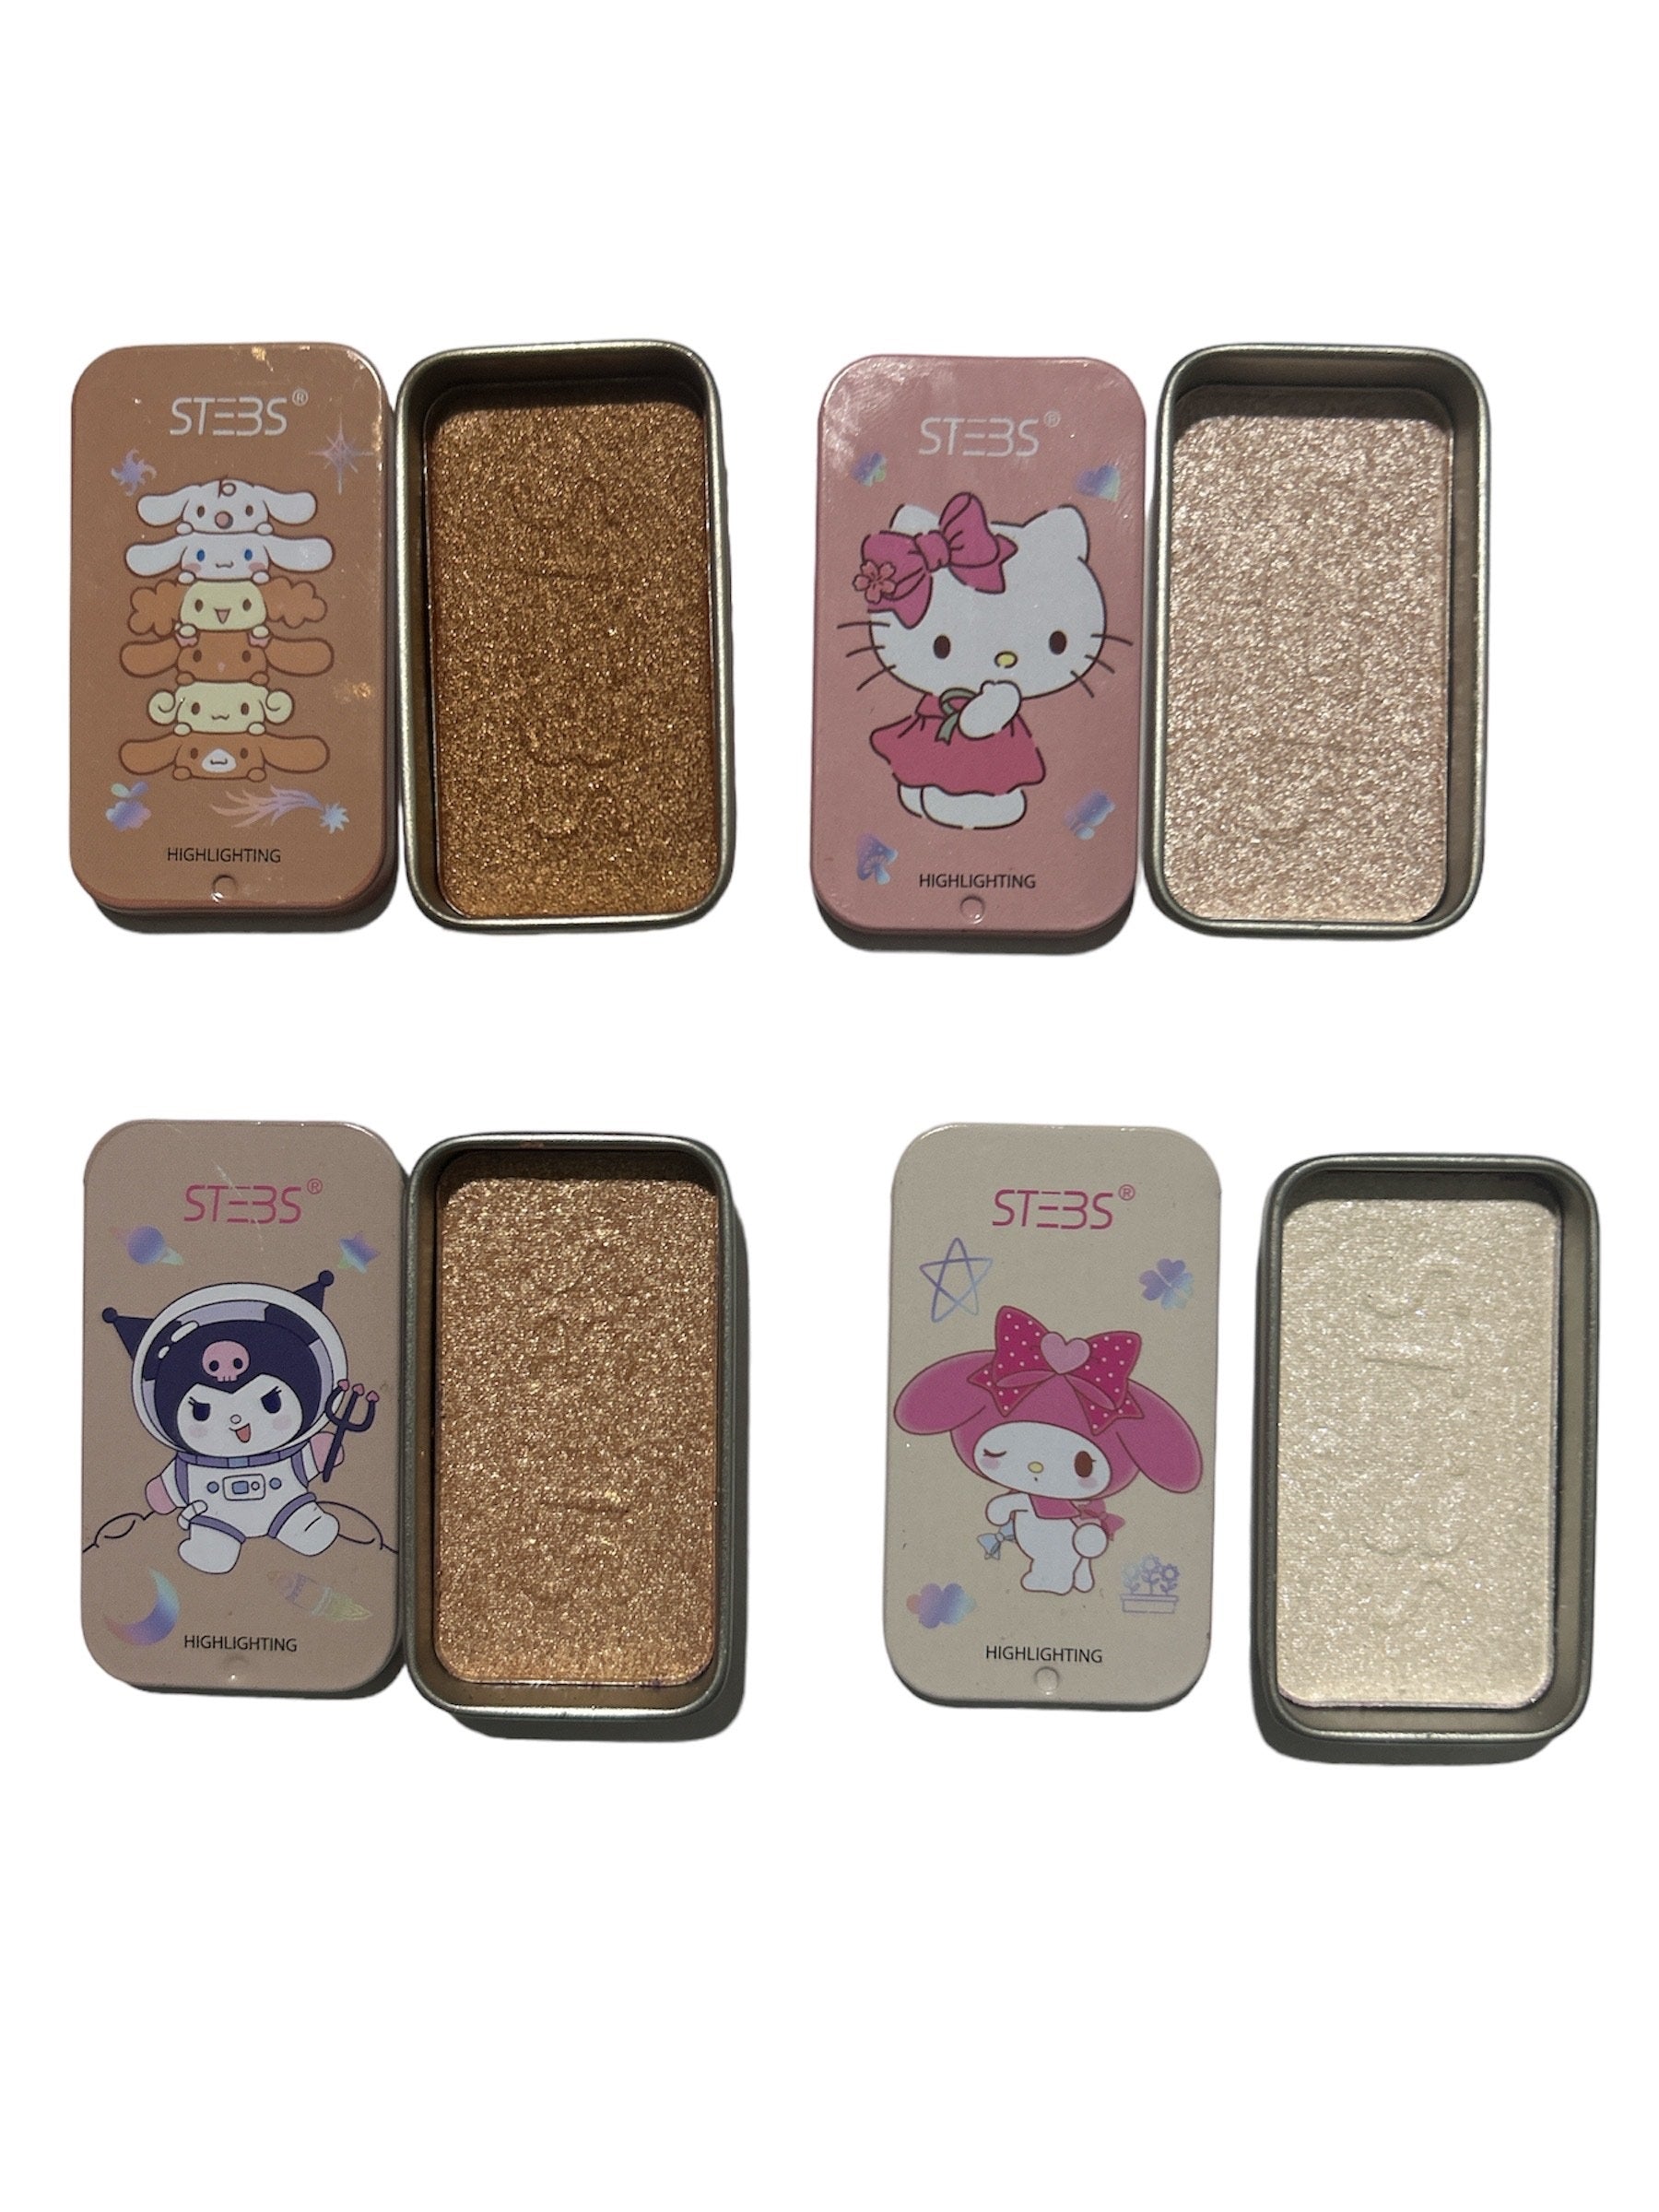 STEBS x Hello Kitty & Friends Highlighter in Collectible Tin